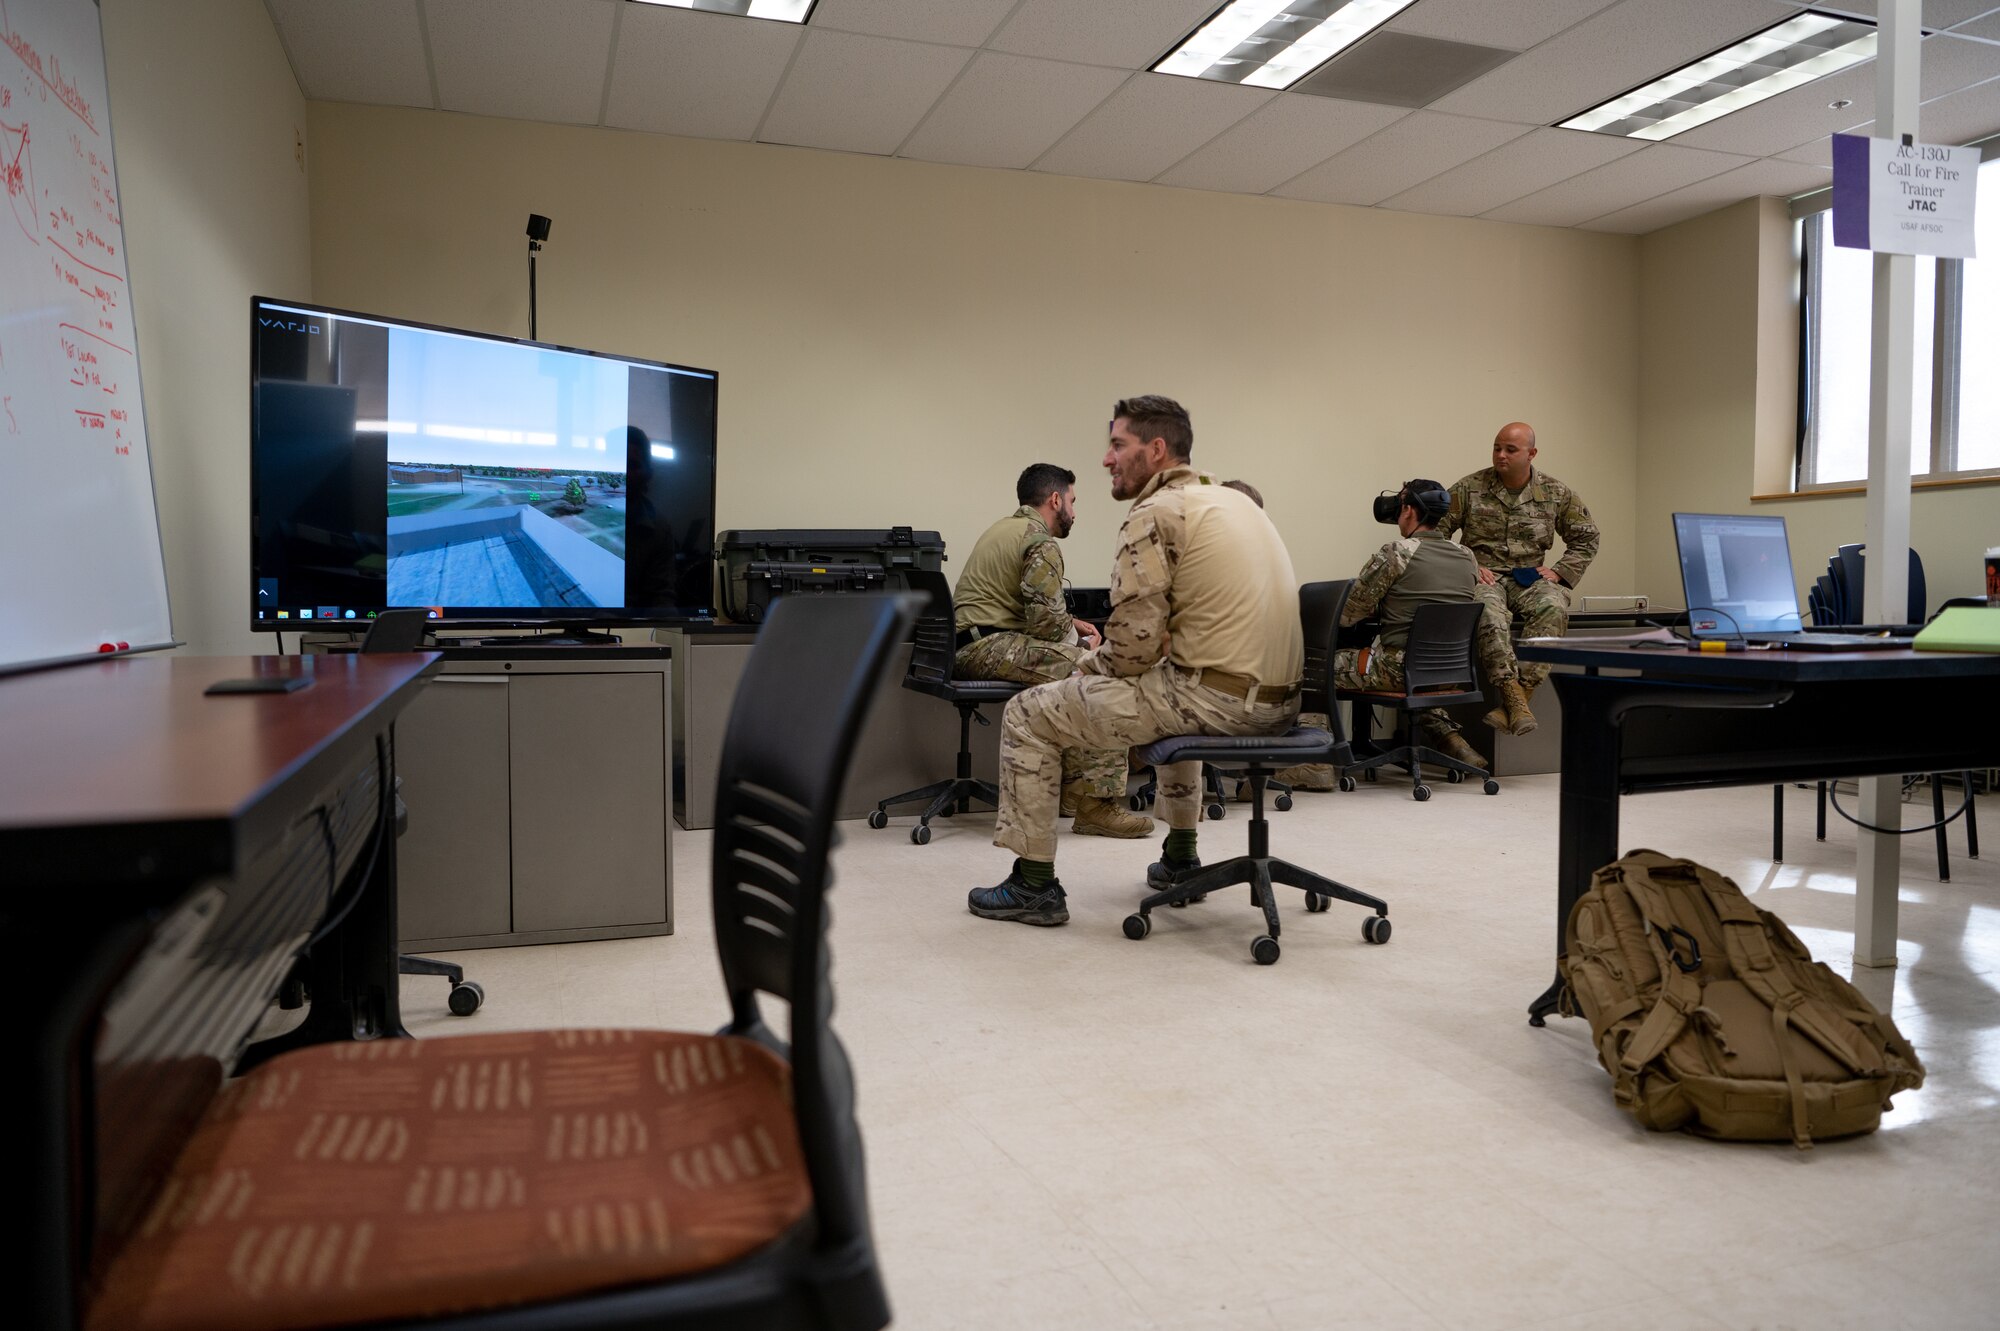 U.S. Air Force Technical Sgt. Edward Newberrn, 23rd Special Tactics Squadron combat controller, evaluates joint terminal attack controllers from Spain on a virtual reality simulator during Bold Quest 21.2 at Muscatatuck Urban Training Center Nov. 6, 2021. Newbernn walked through training scenarios and how to work with AC-130J Ghostrider aircraft and then gave tips on how to communicate effectively. (U.S. Air Force photo by Staff Sgt. Rito Smith)